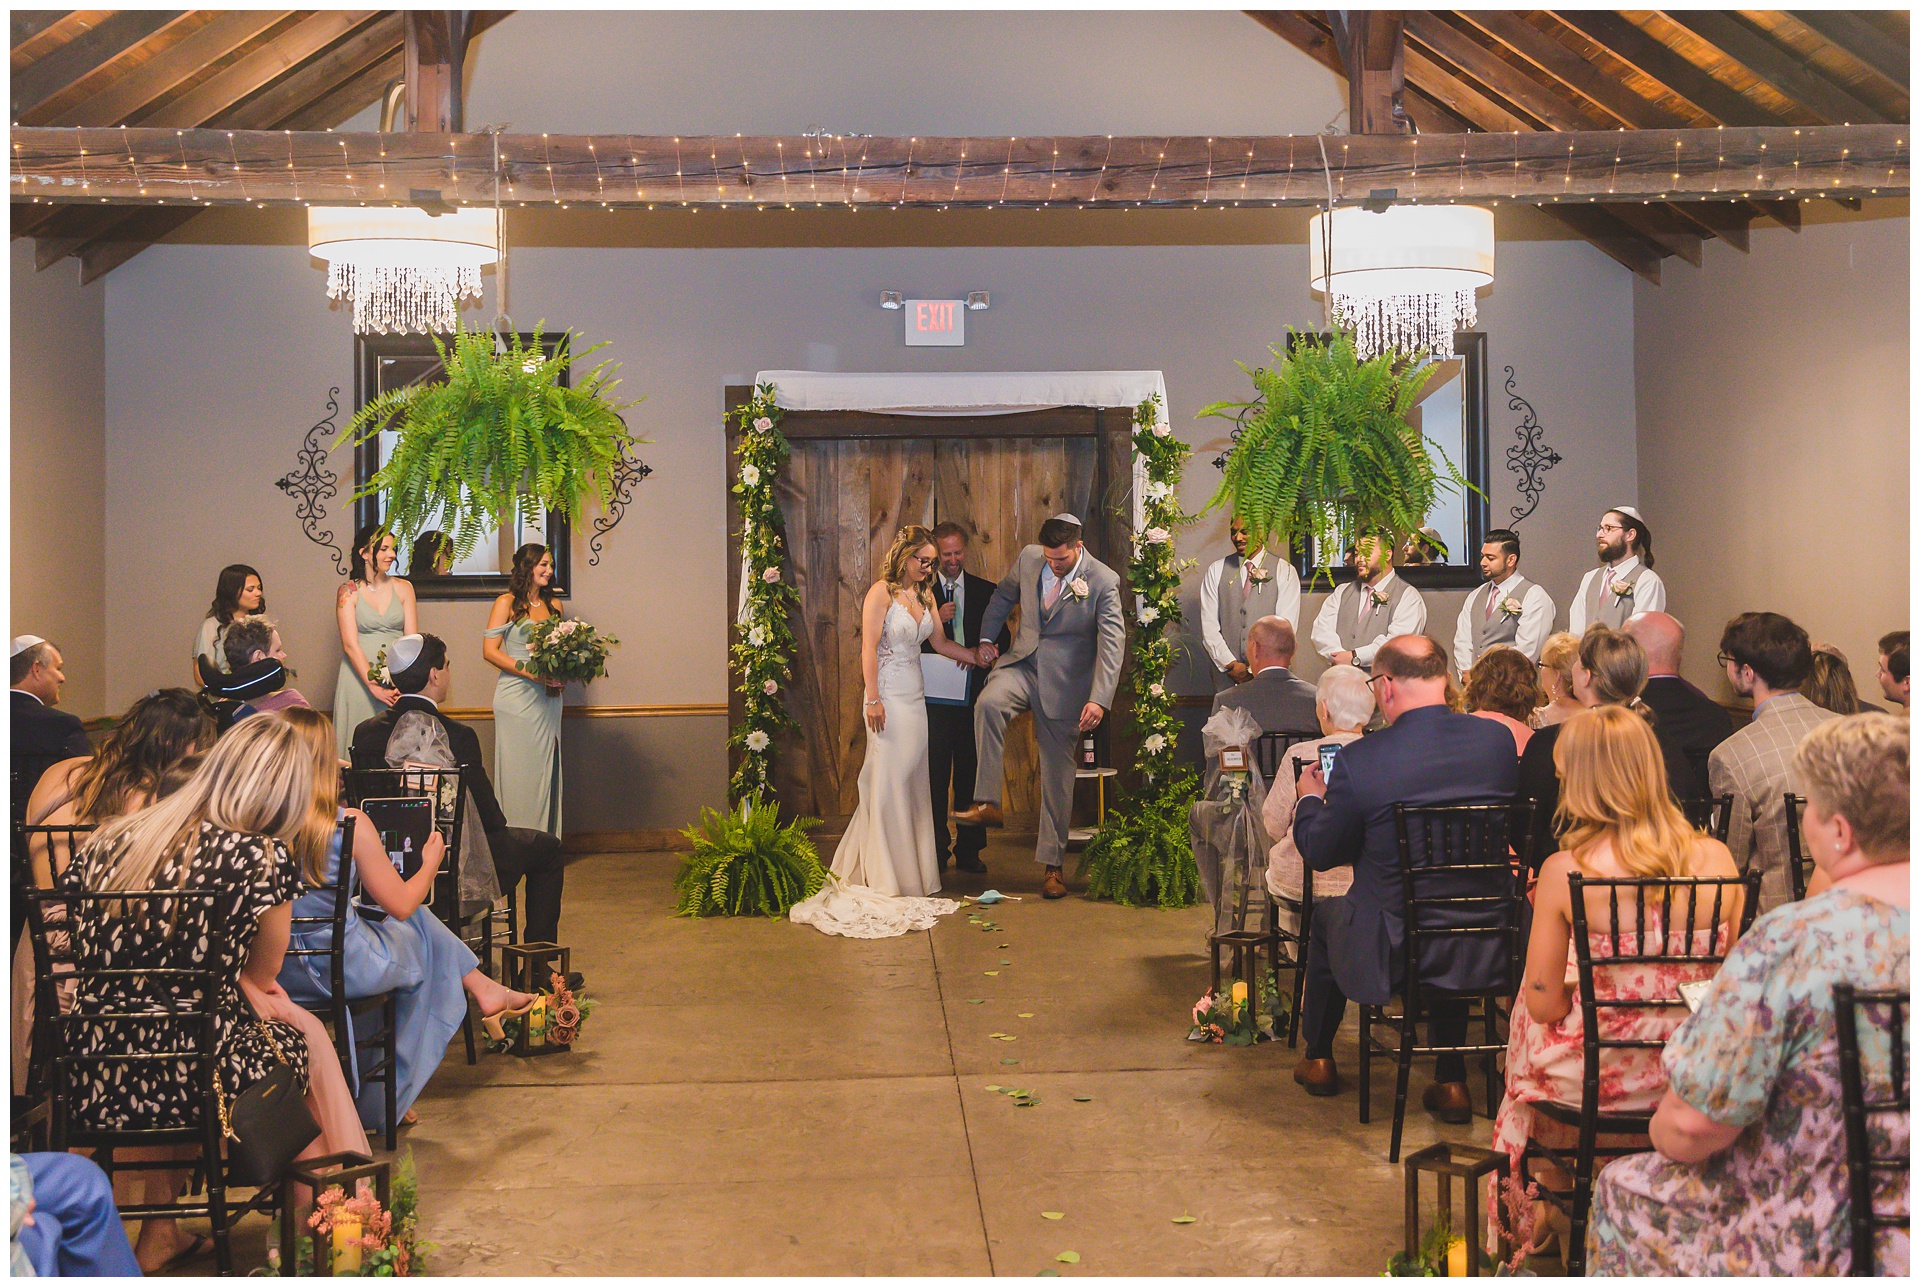 Wedding photography at The W Banquet Hall in Lawrence, Kansas, by Kansas City wedding photographers Wisdom-Watson Weddings.